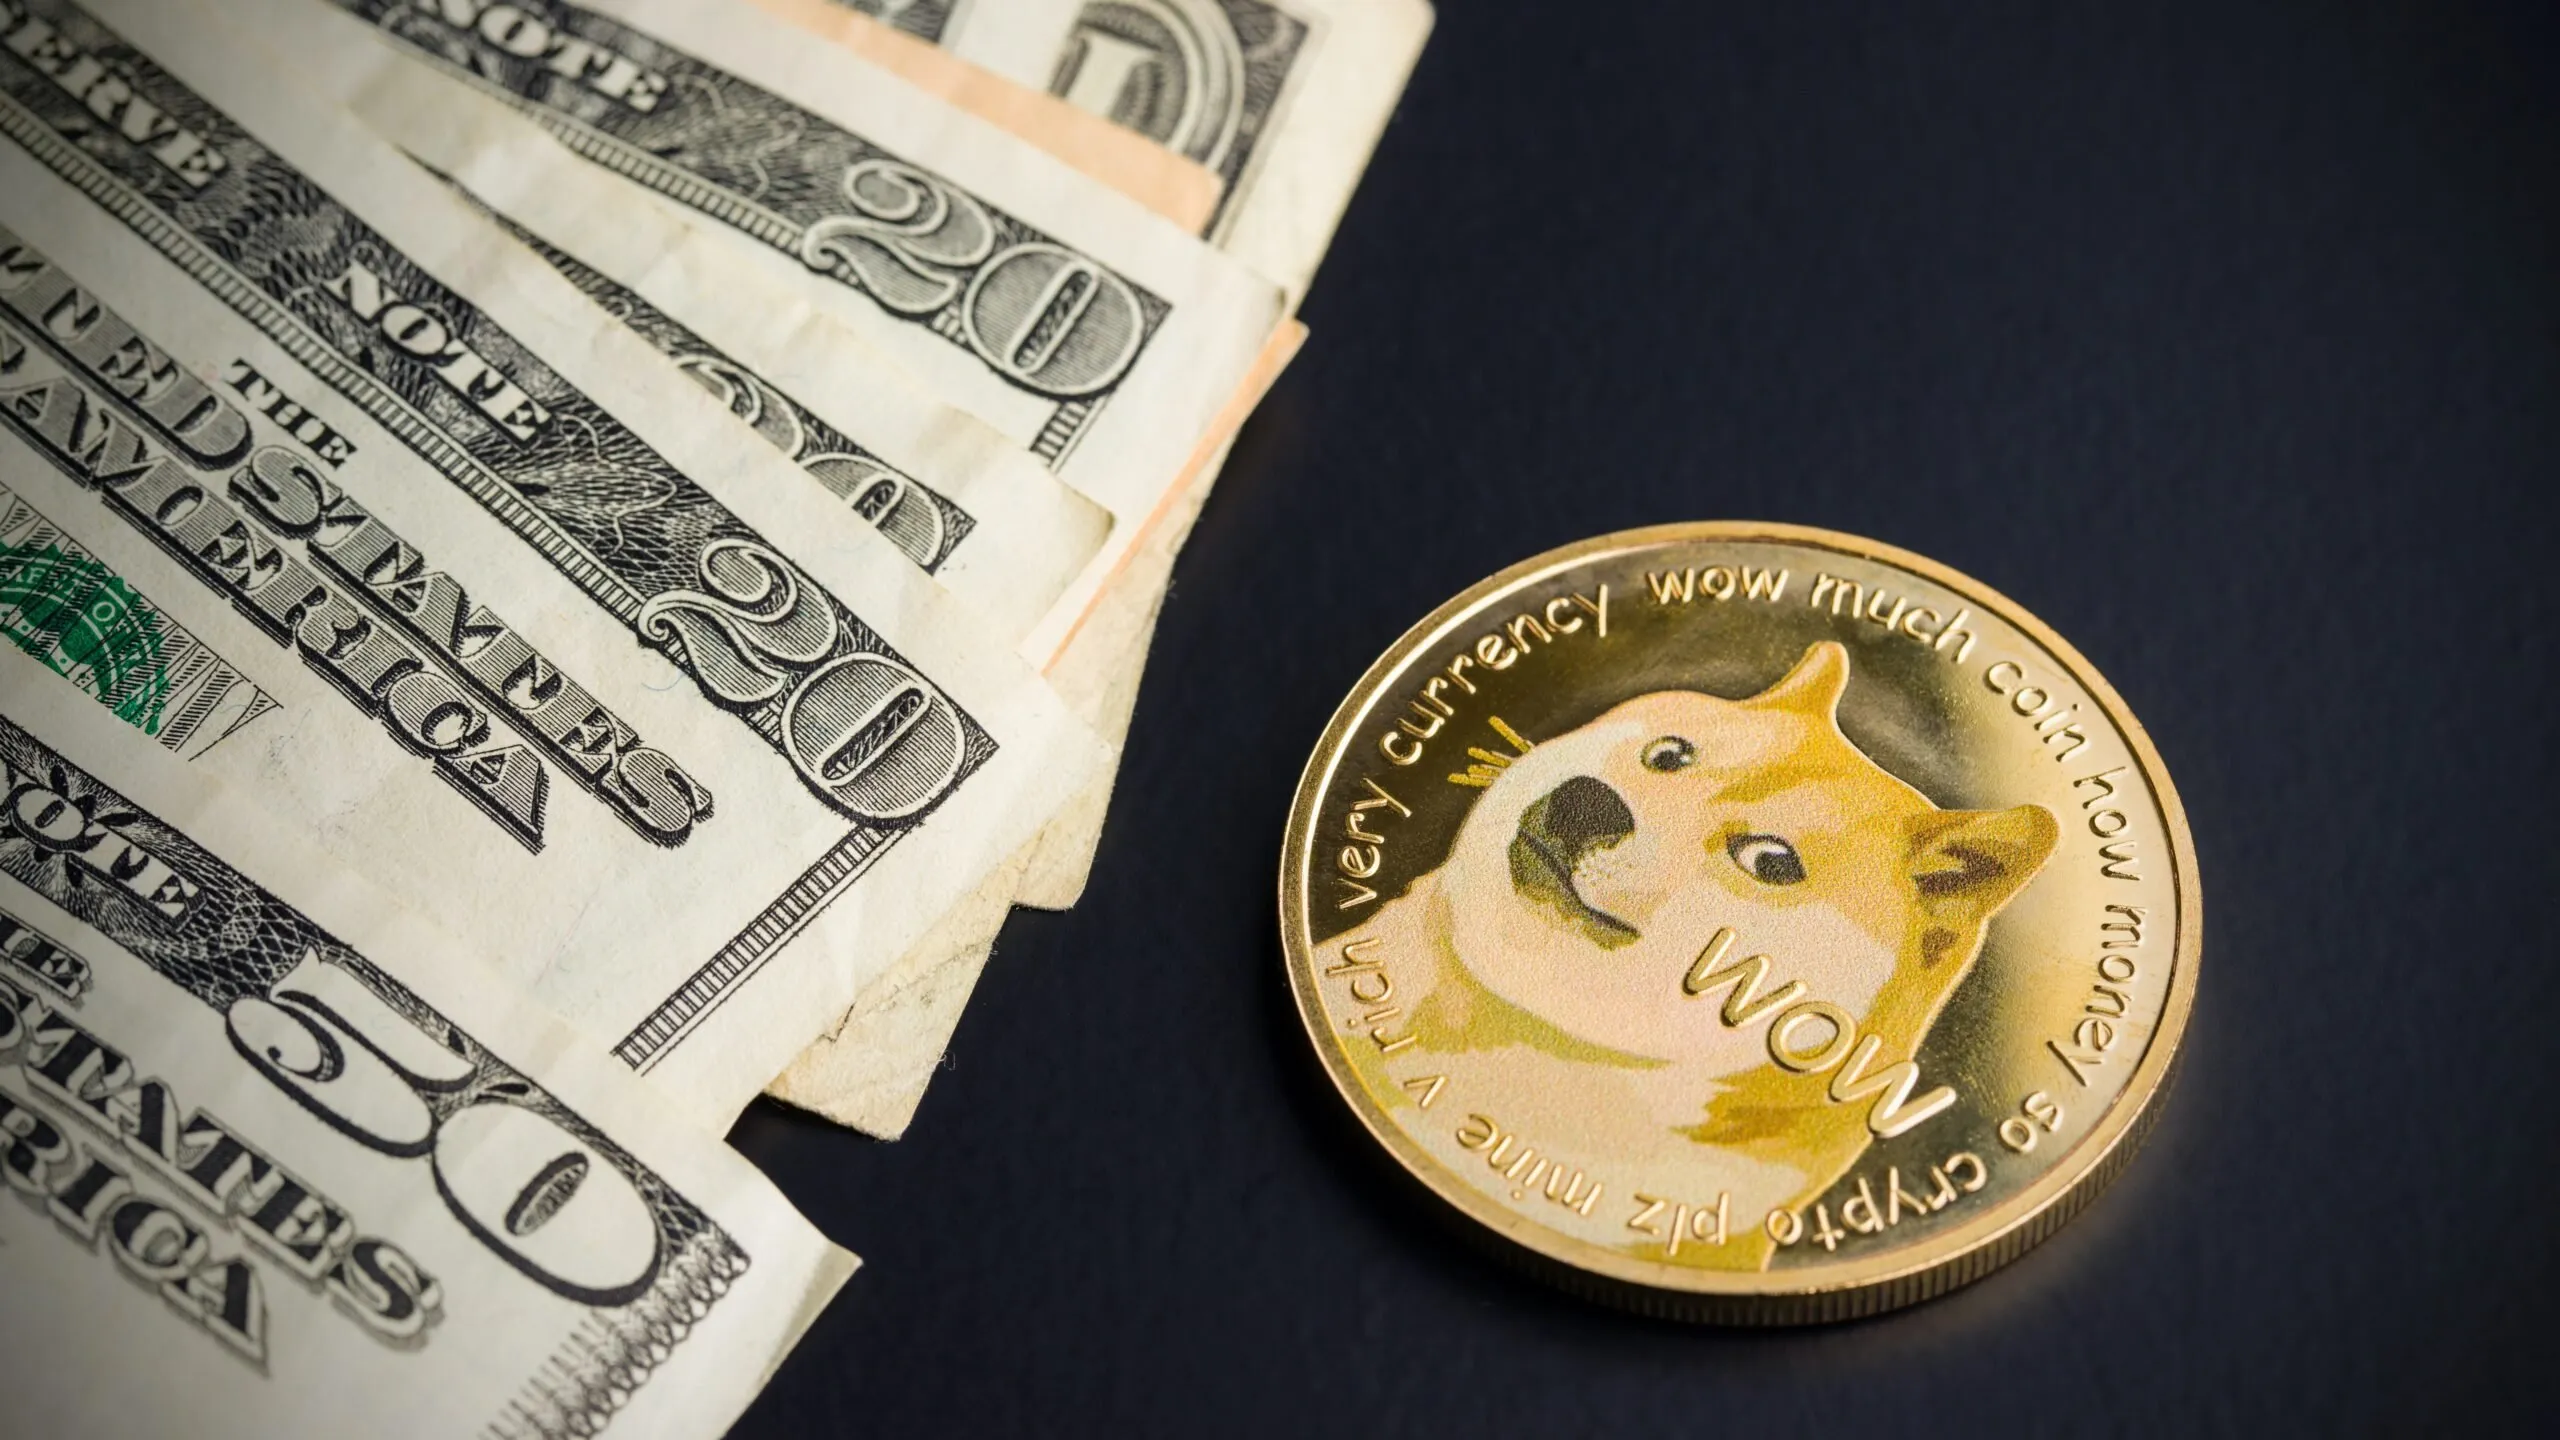 Dogecoin is the top "meme coin" by market cap. Image: Shutterstock.